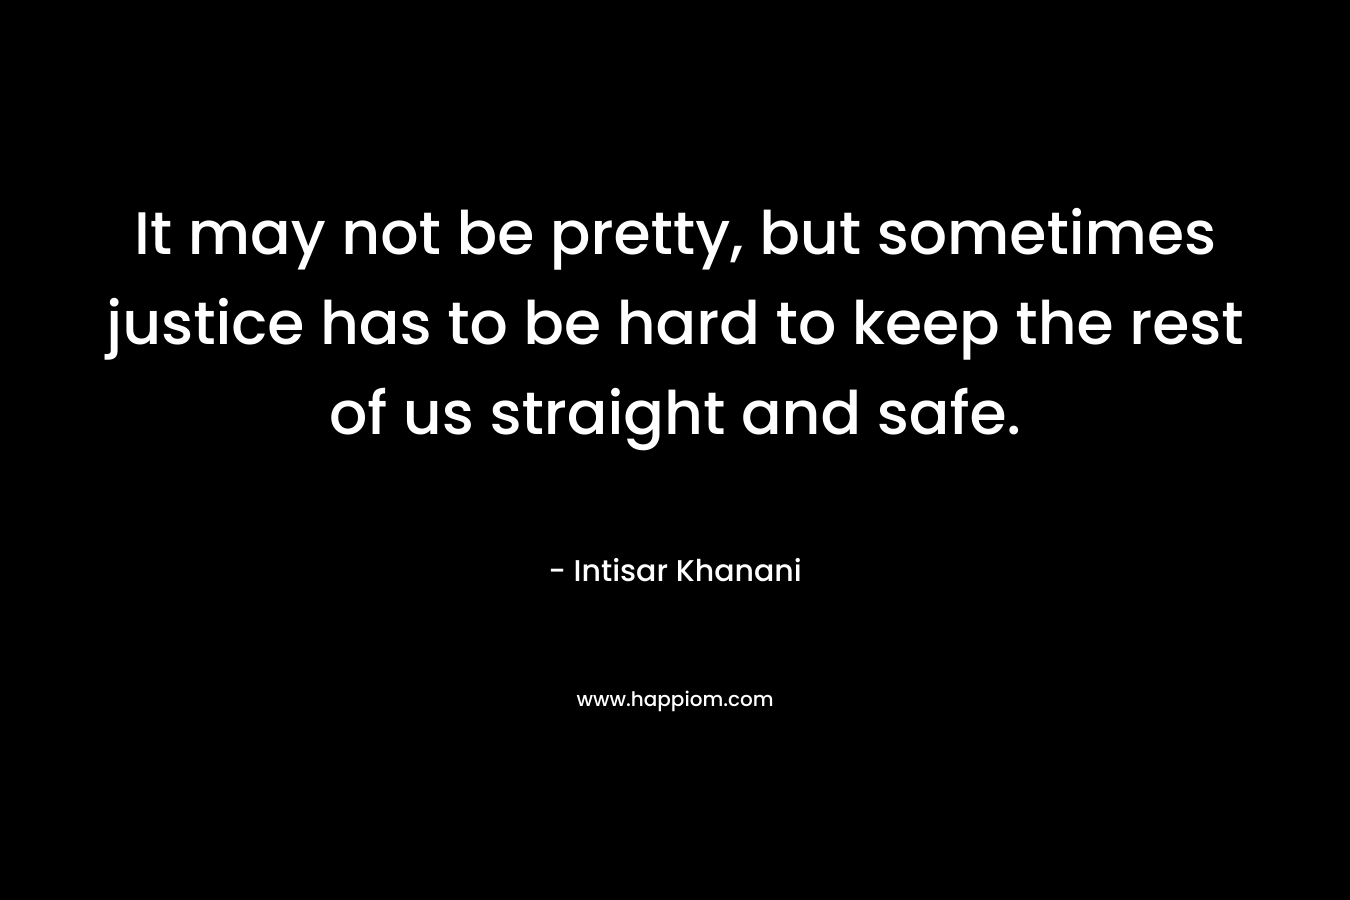 It may not be pretty, but sometimes justice has to be hard to keep the rest of us straight and safe. – Intisar Khanani